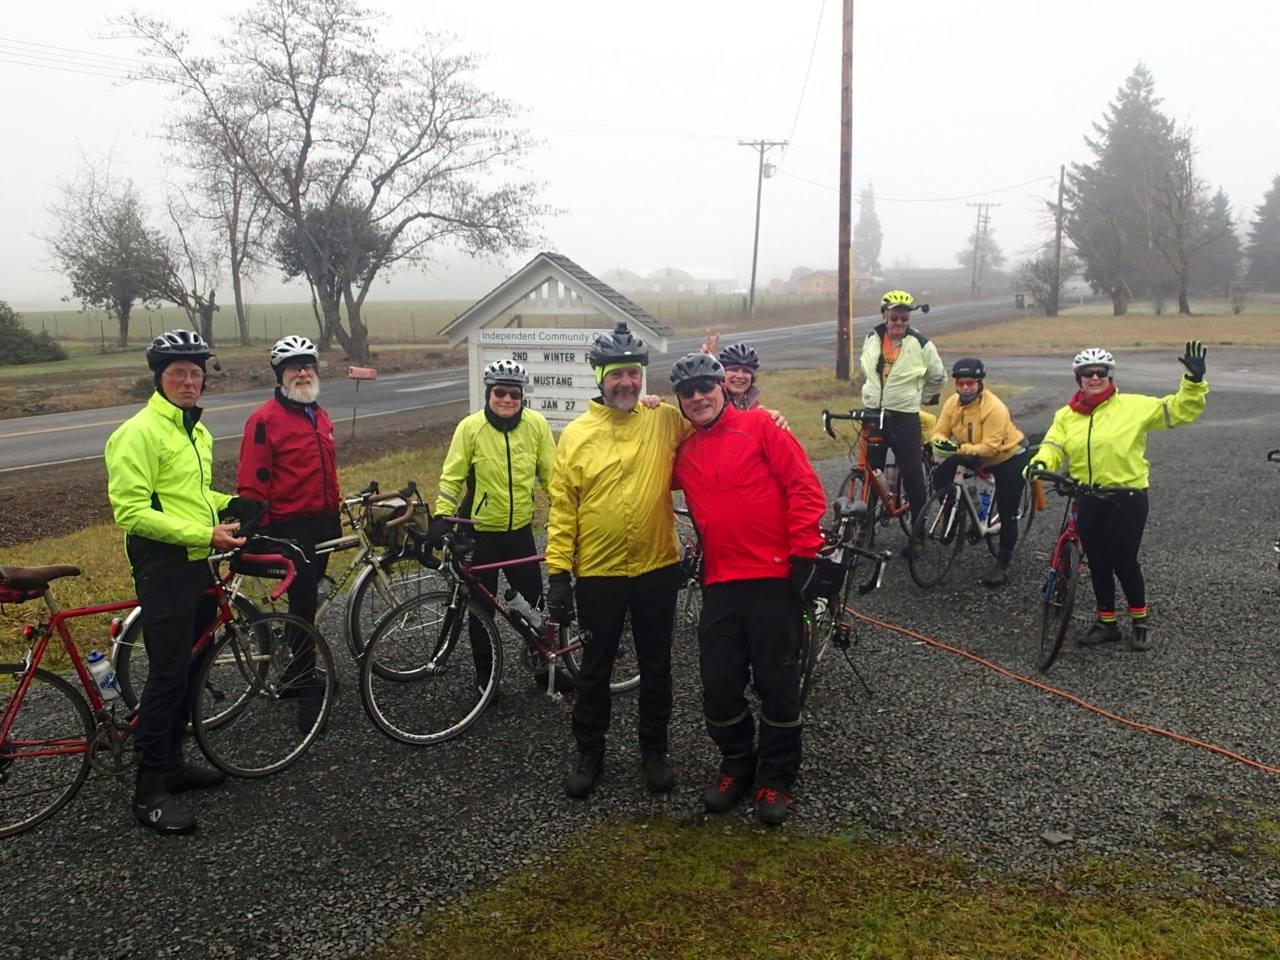 Tenners on a foggy ride